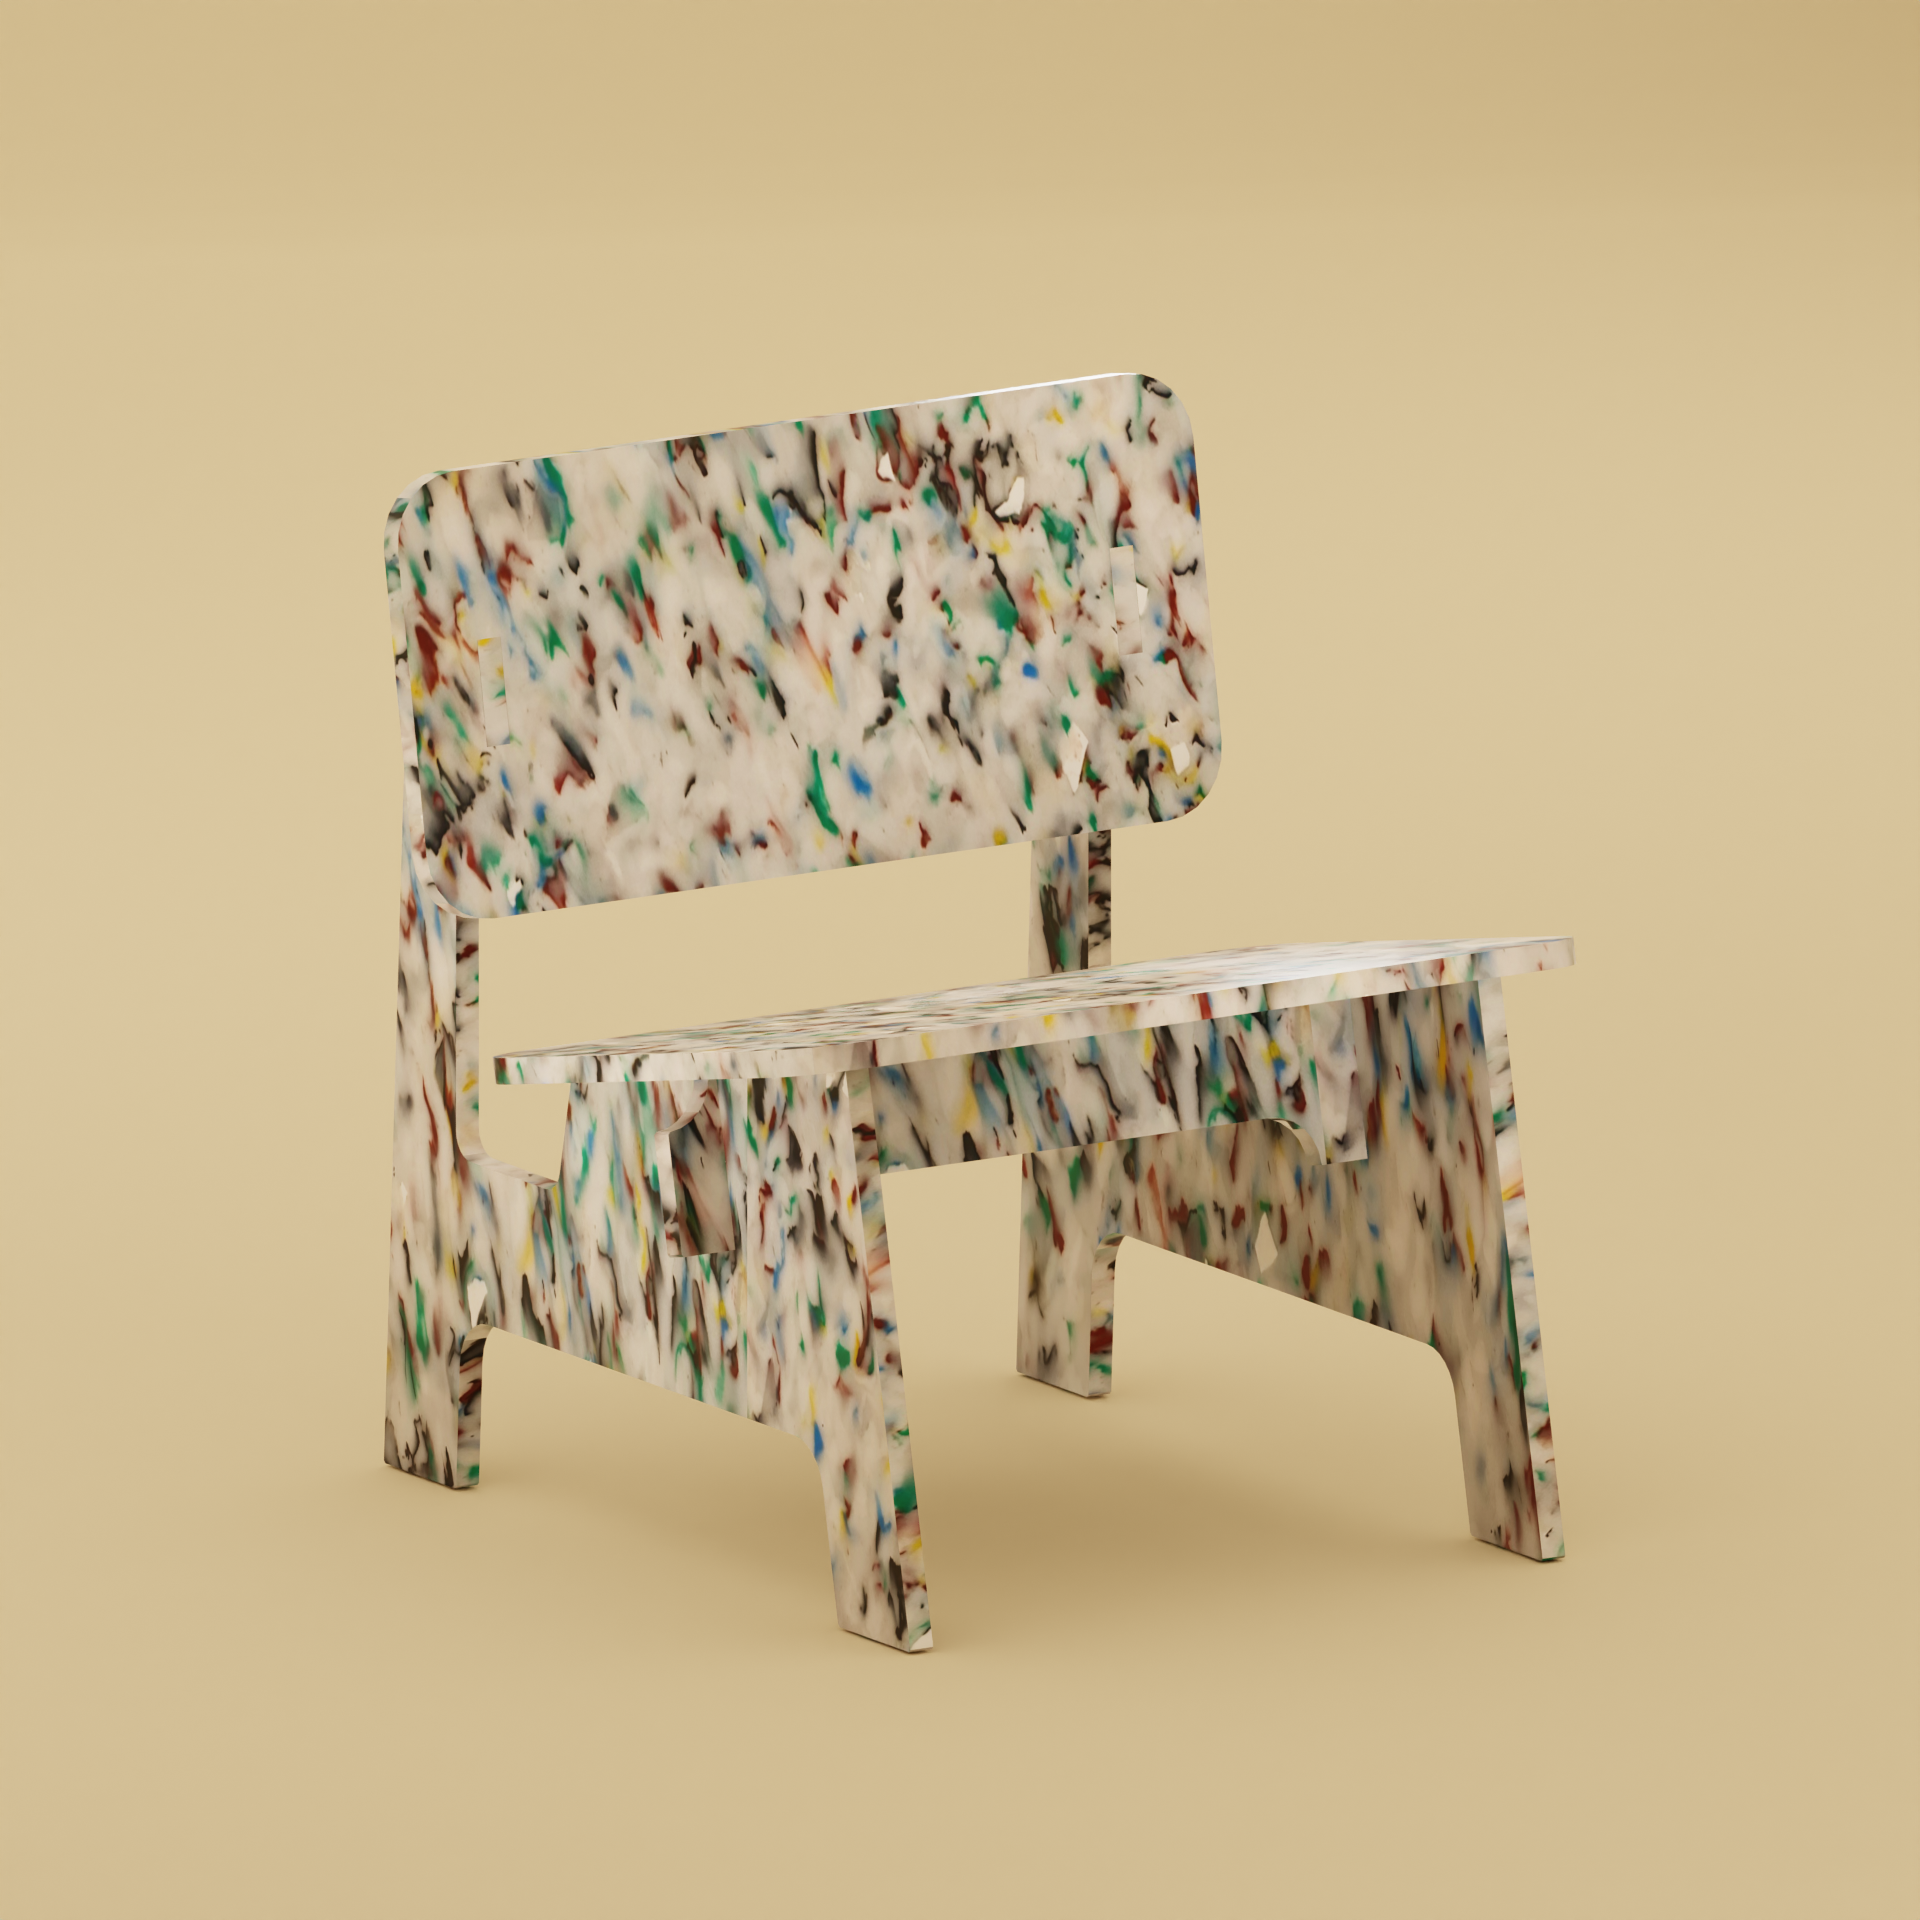 RENDER OF CLOLOURFUL CHAIR BY THE MINIMONO PROJECT - BRAND FOR ECO FRIENDLY - PLAYFUL - MULTI FUNCTIONAL - SUSTAINABLE - HIGH QUALITY - DESIGN FURNITURE FROM RECYCLED PLASTIC FOR BOTH ADULT AND CHILDREN MADE IN BERLIN GERMANY